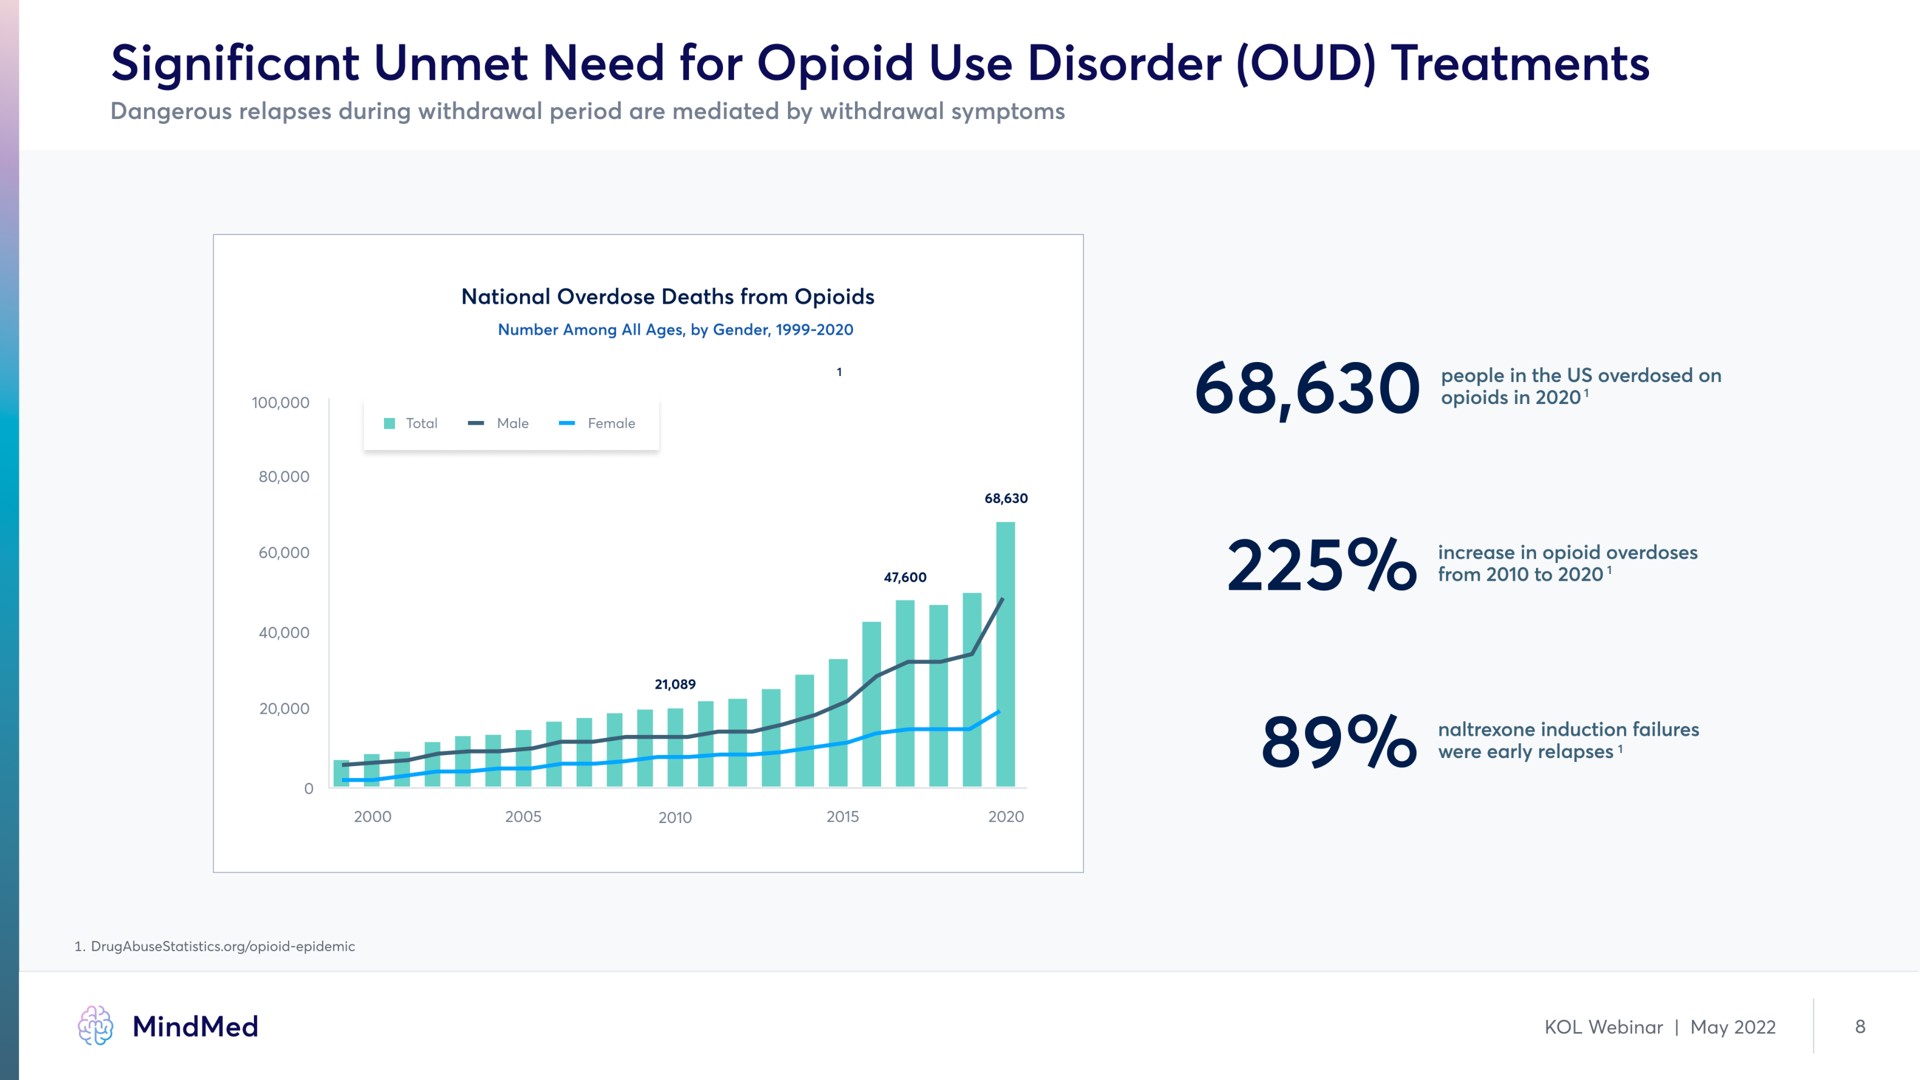 significant unmet need for use disorder treatments | MindMed